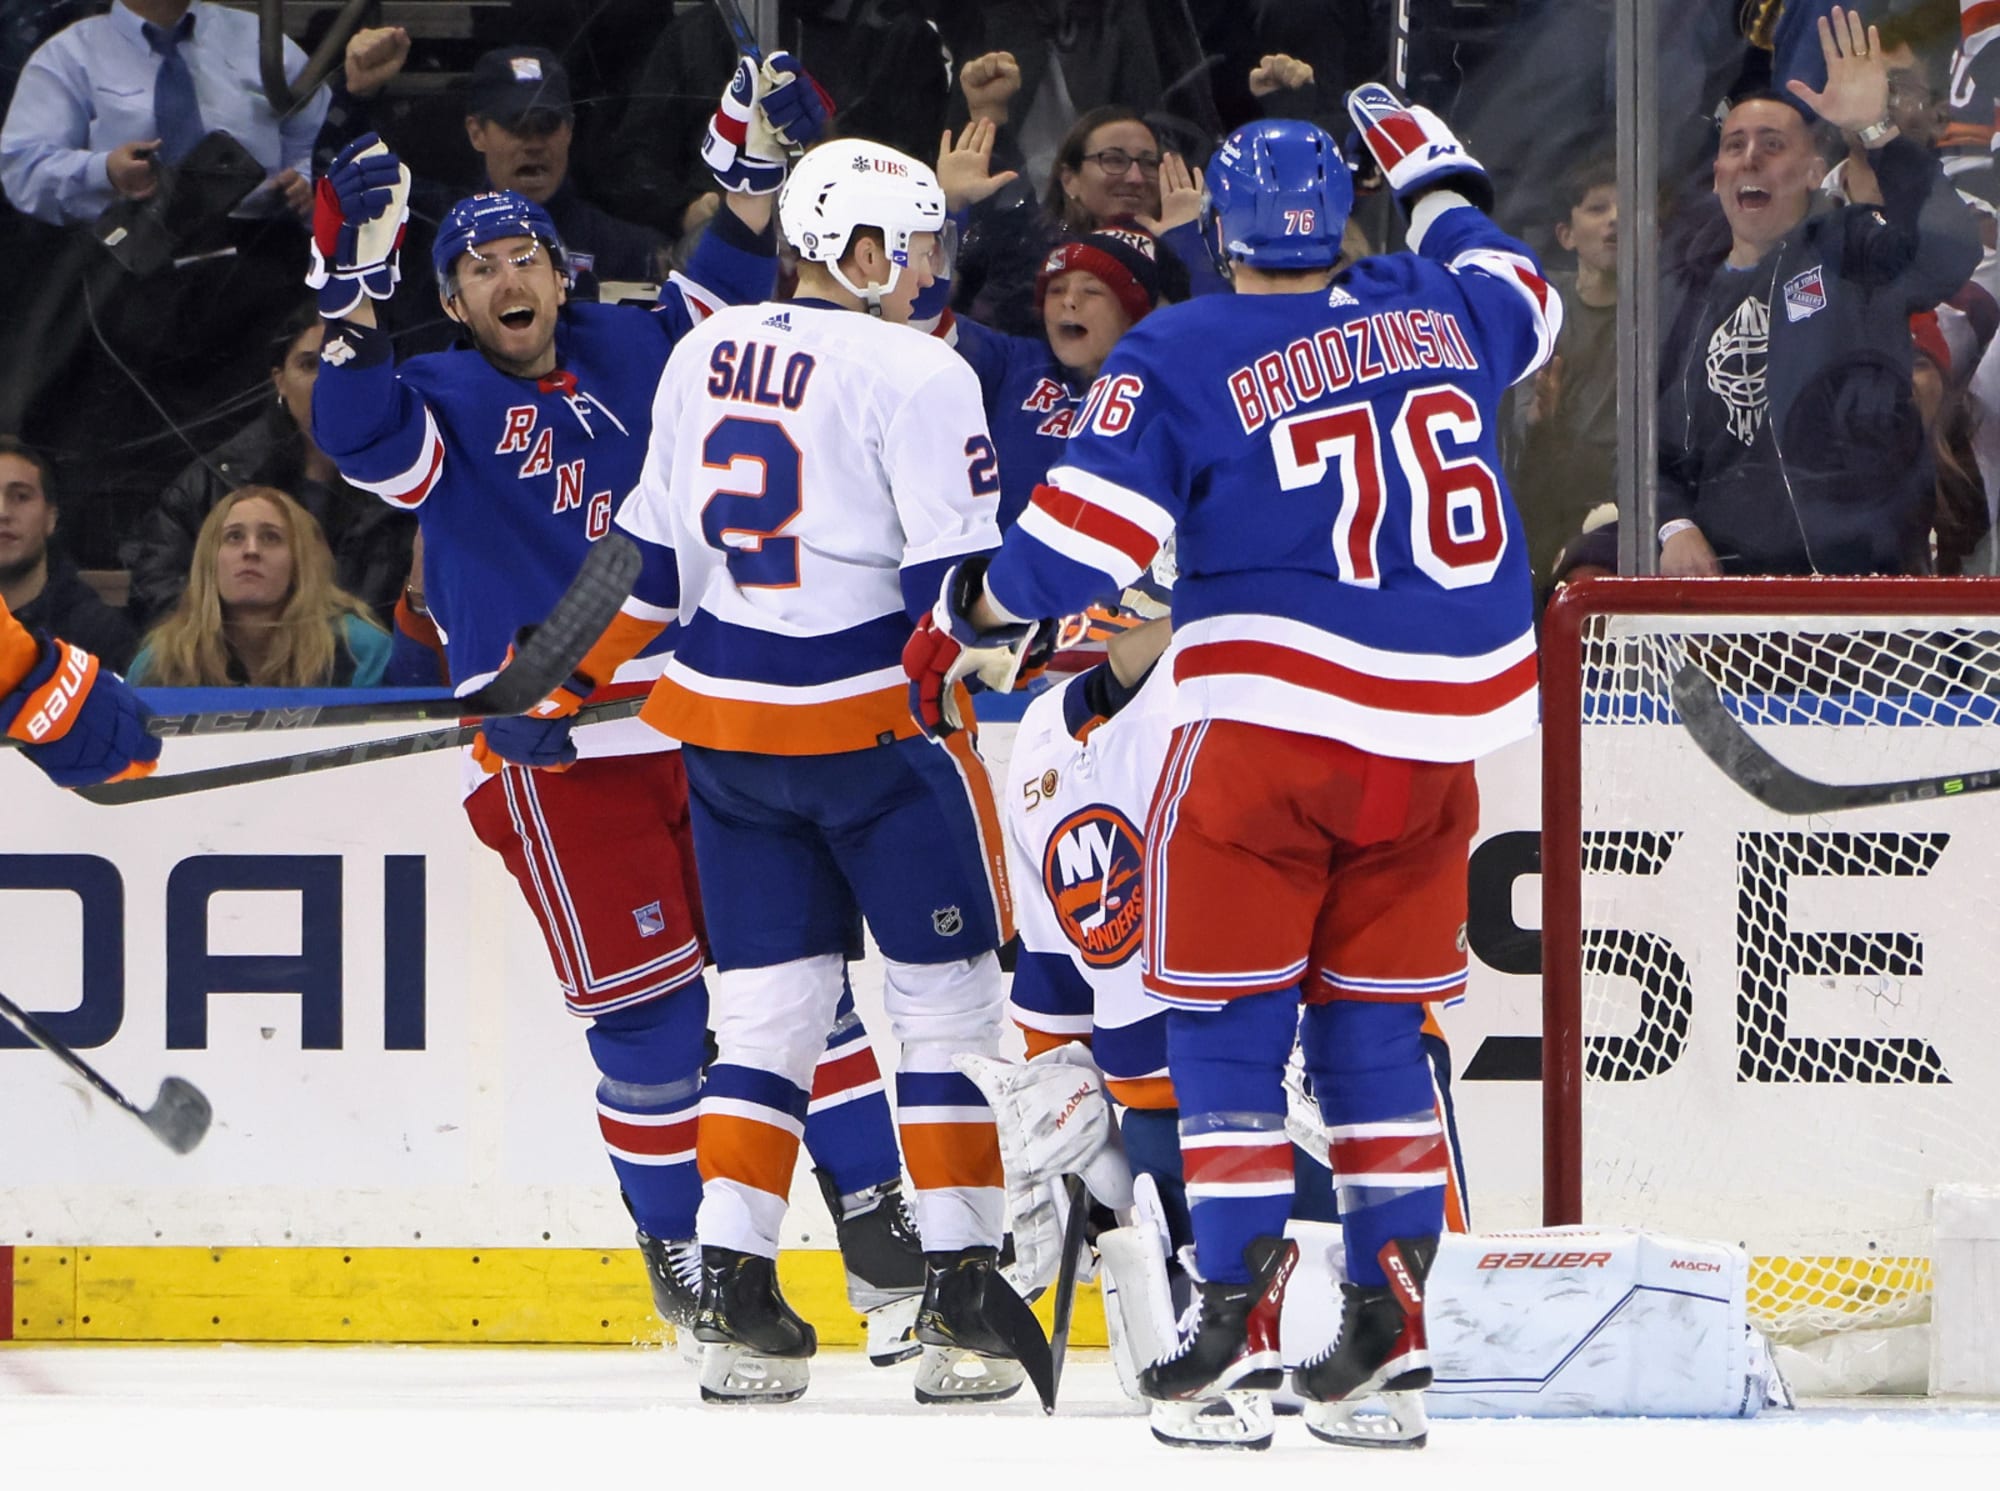 MetLife Stadium to host two outdoor games with Rangers, Isles, Devils,  Flyers